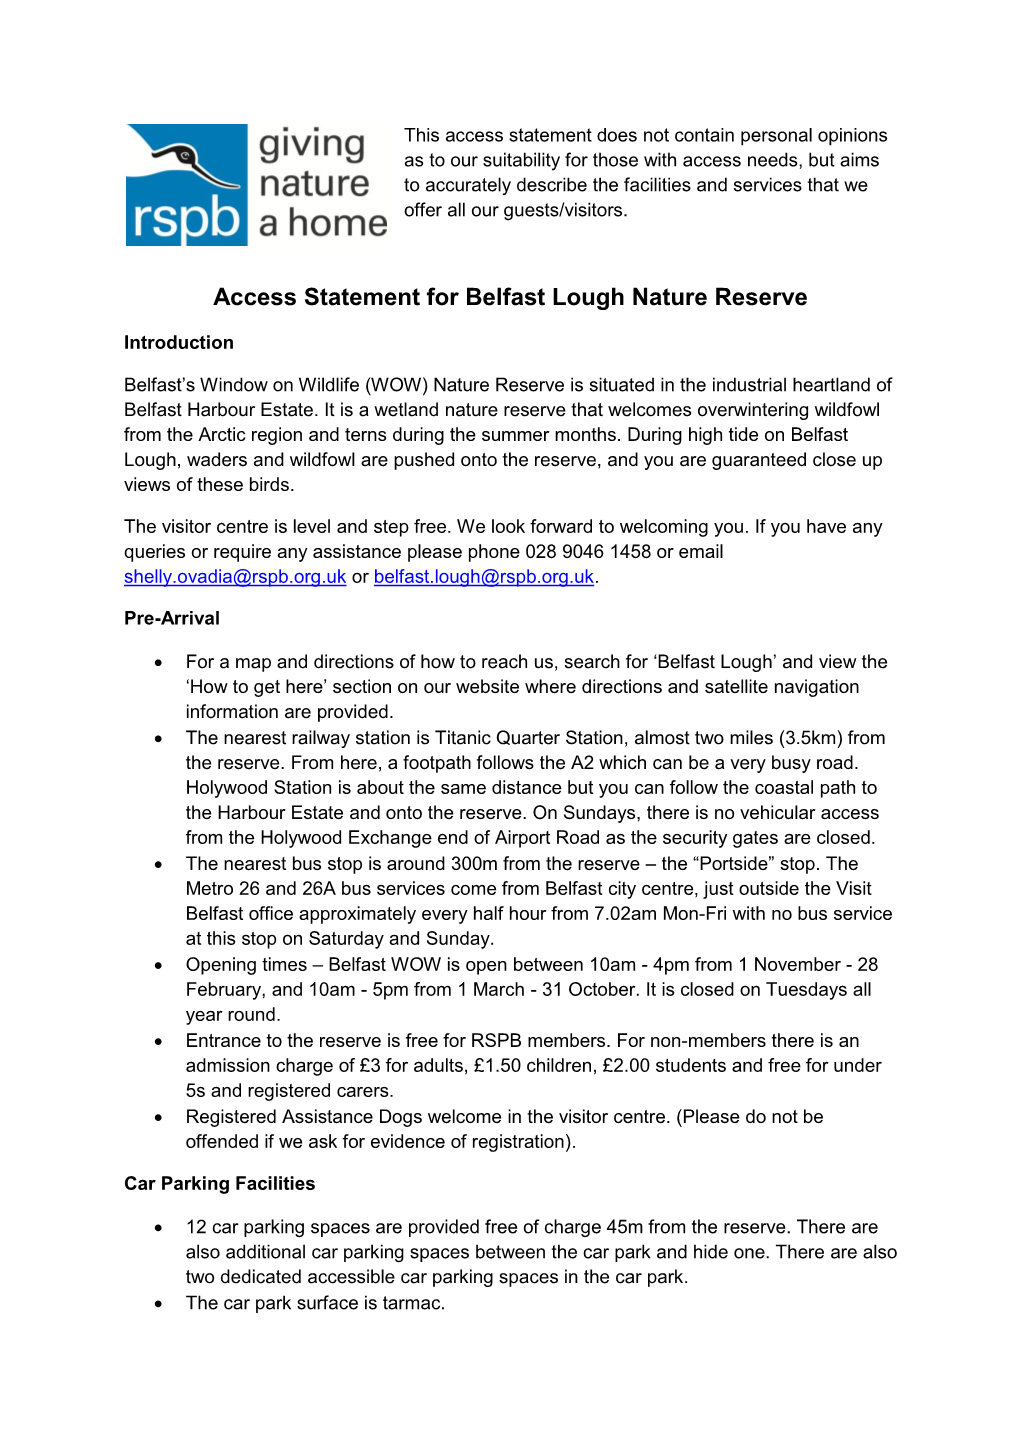 Access Statement for Belfast Lough Nature Reserve